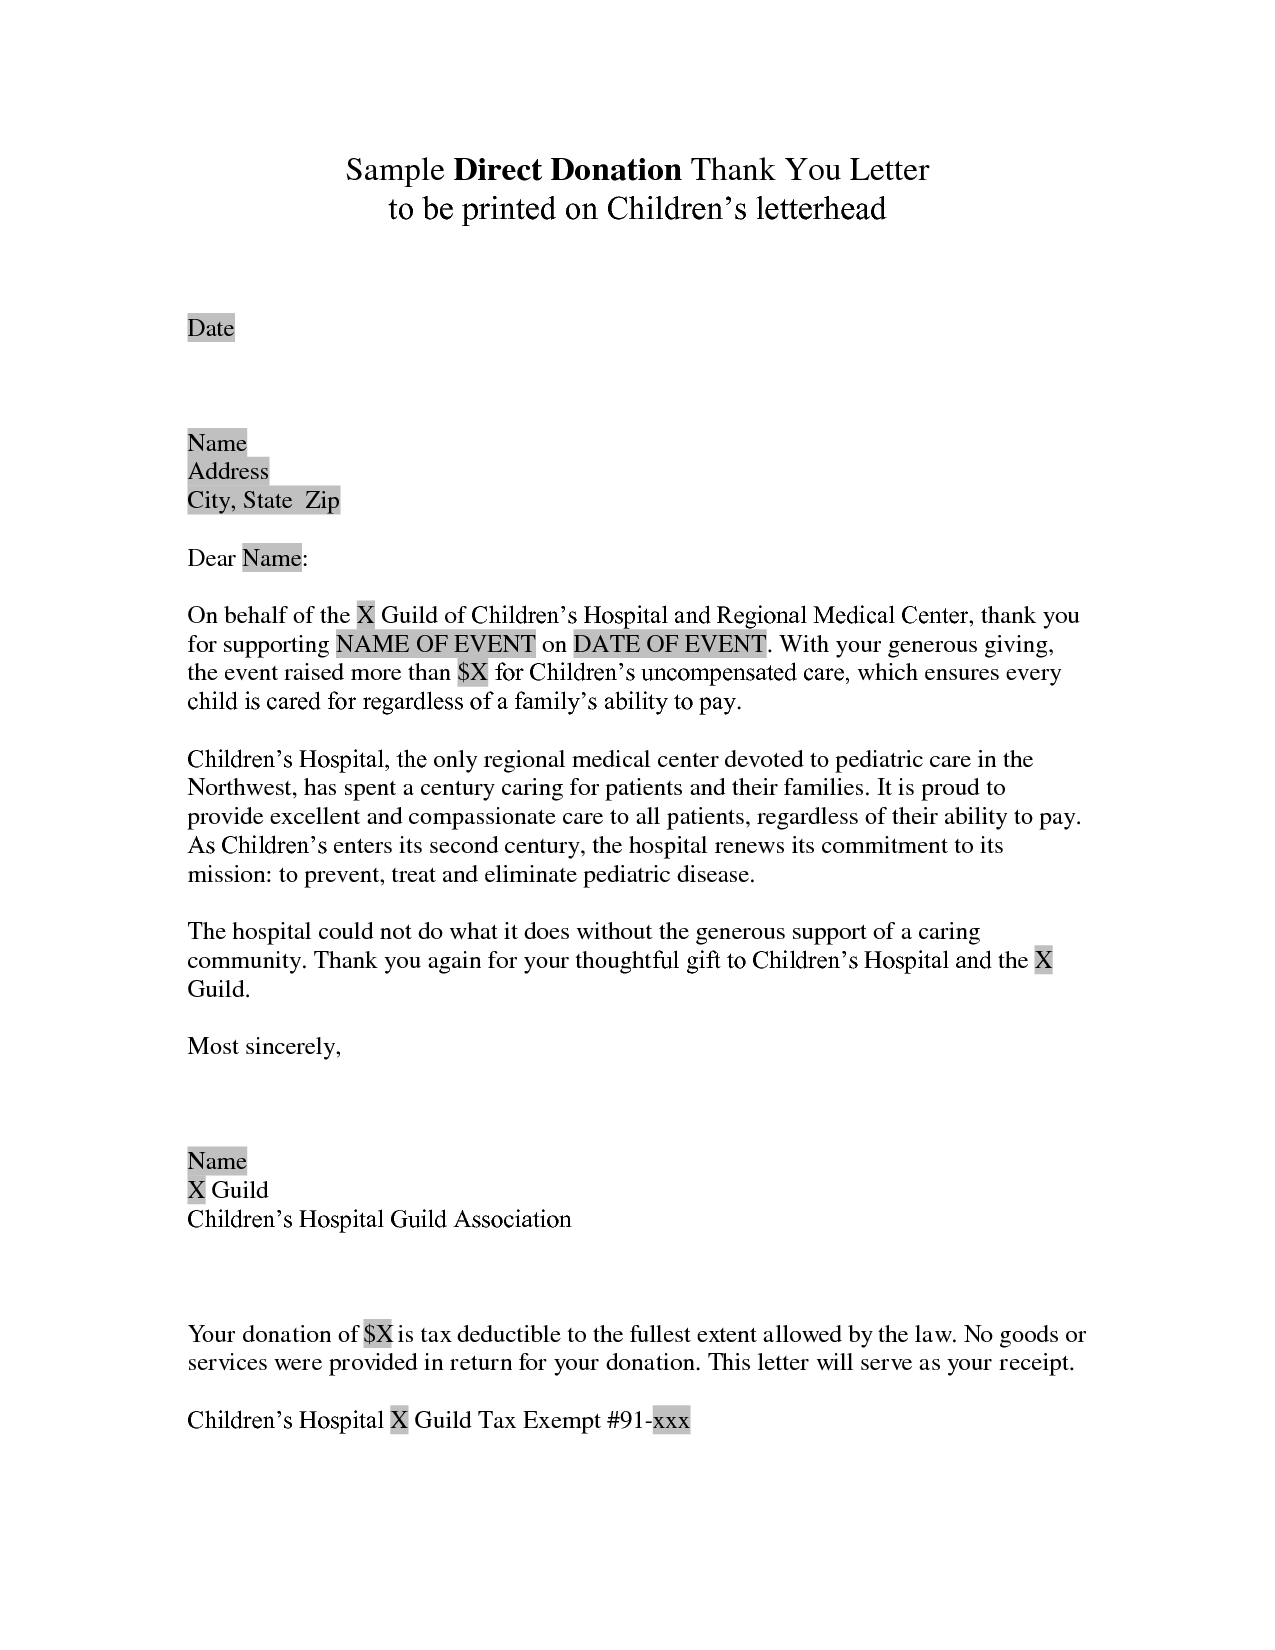 Donation Letter Template for Church - Donor Thank You Letter Sample